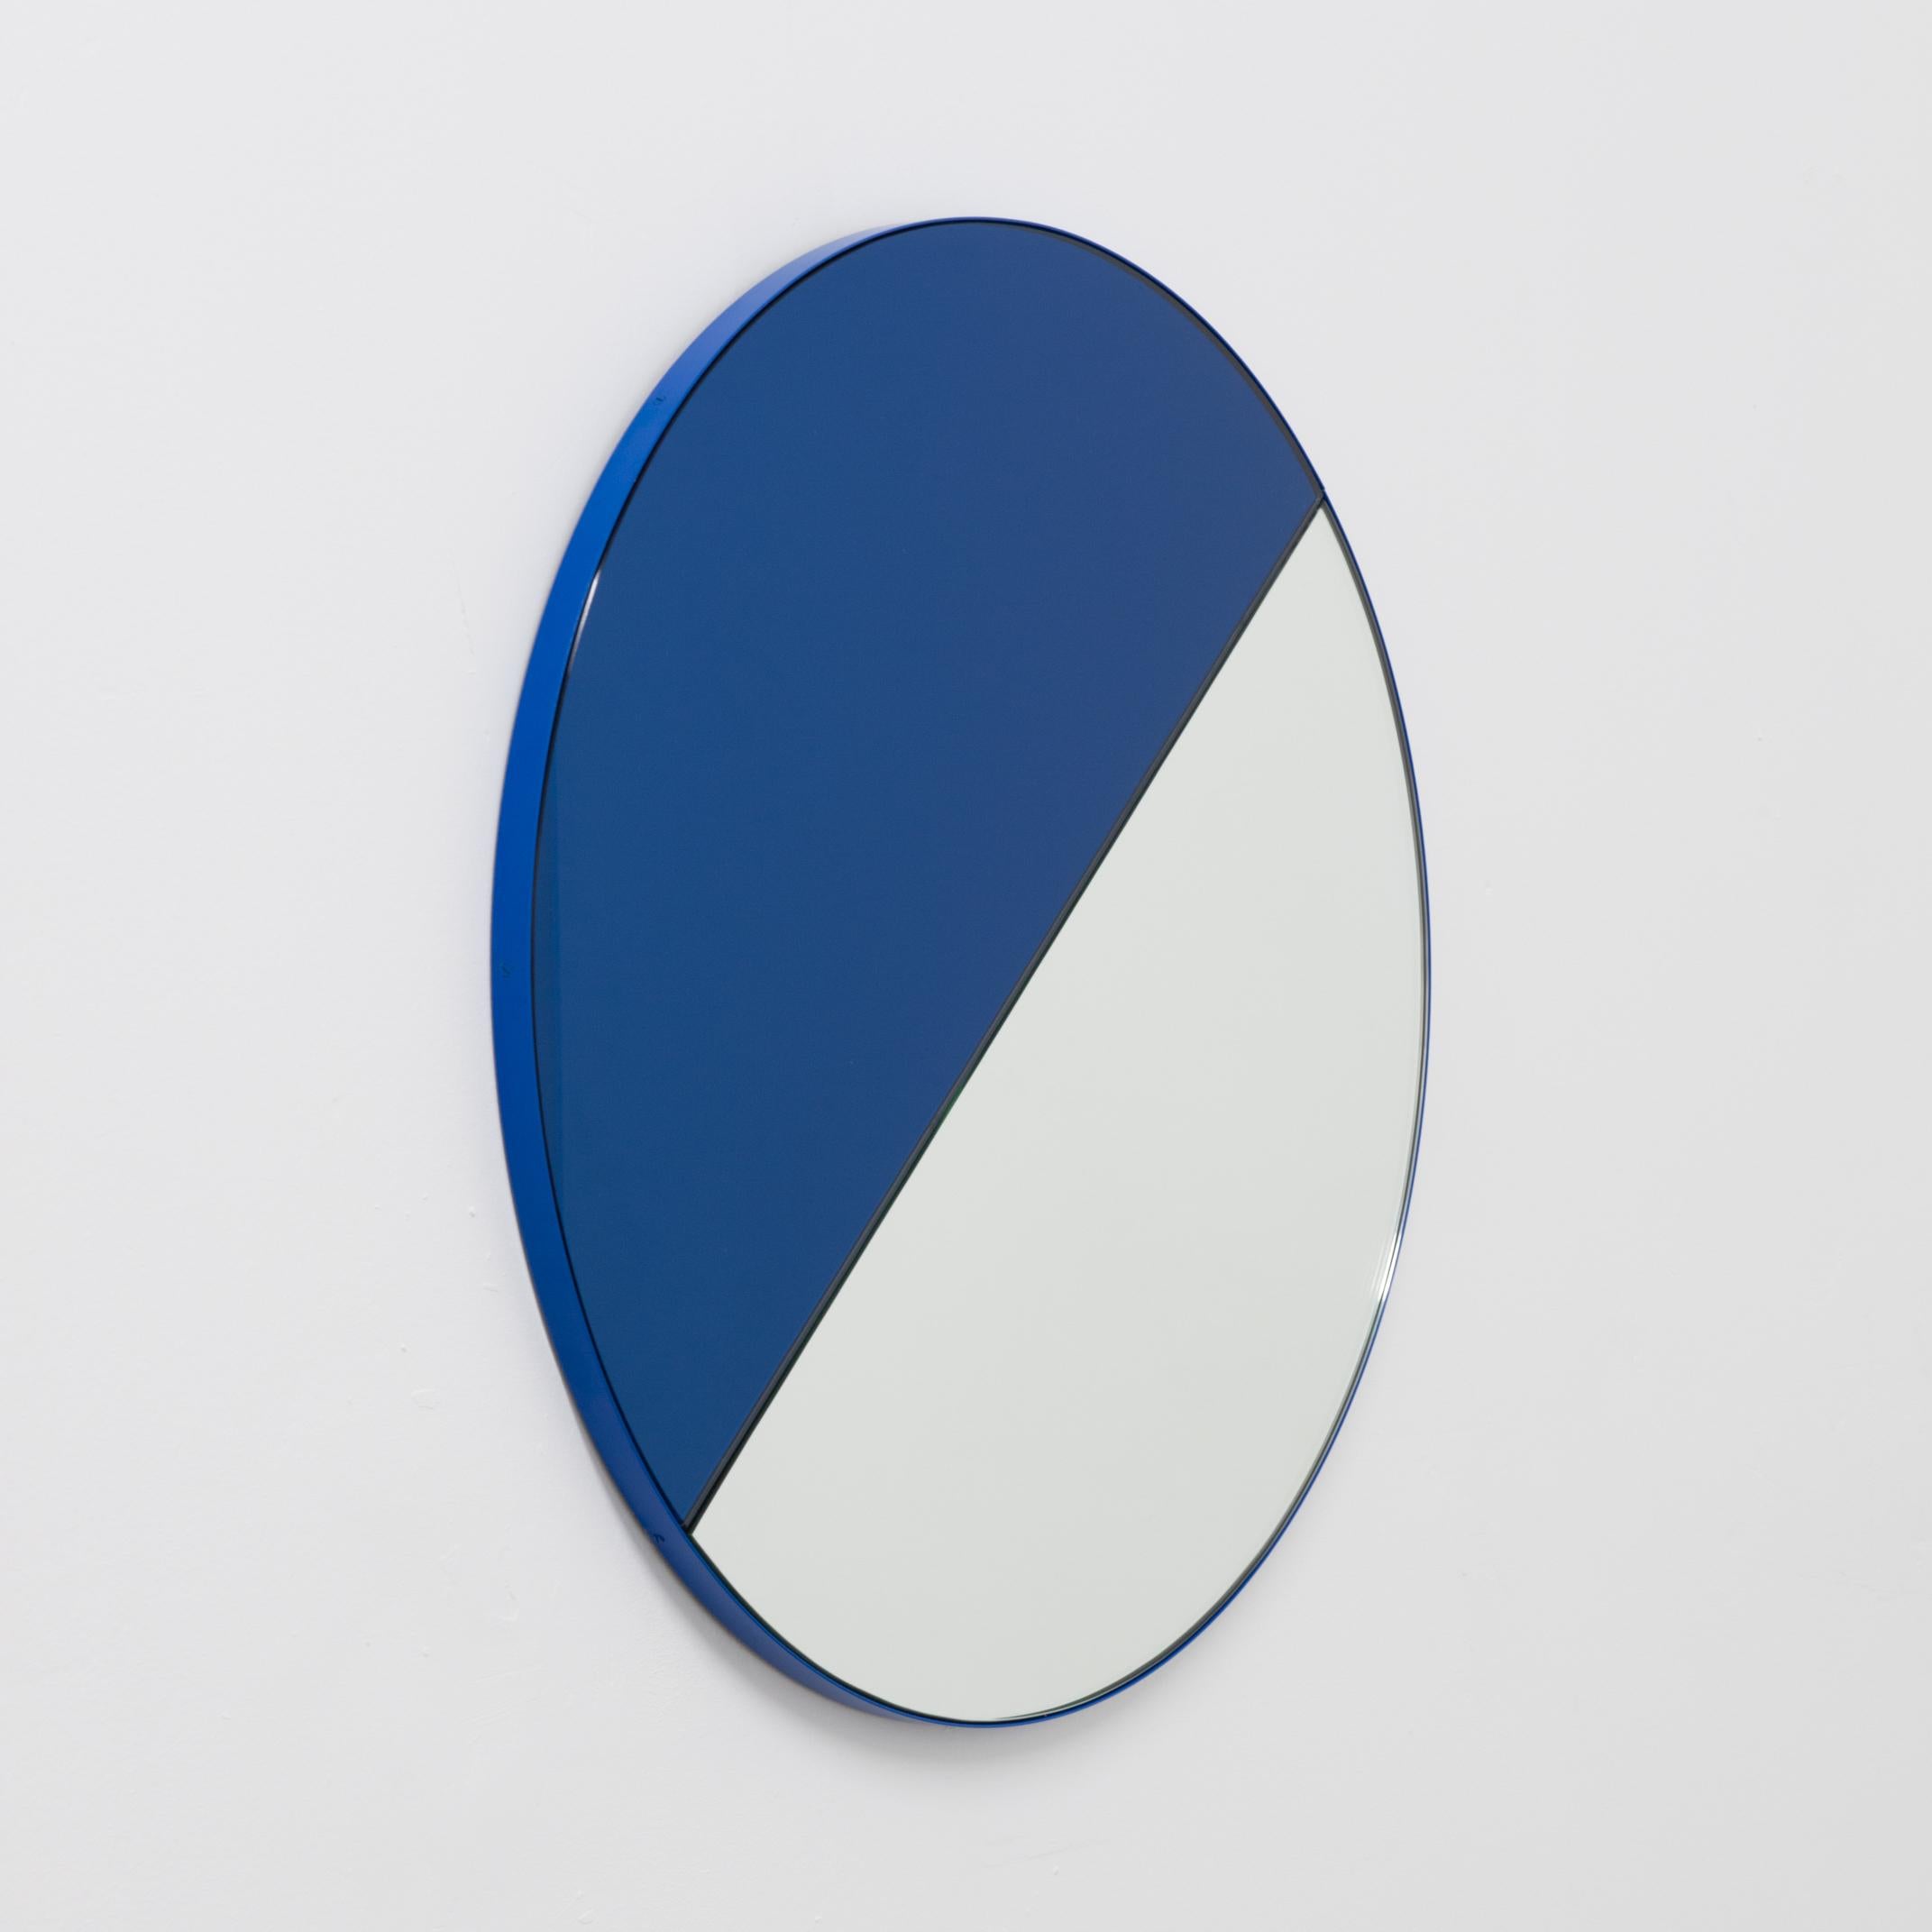 Orbis Dualis Mixed Blue Tinted Contemporary Round Mirror with Blue Frame, Small For Sale 2